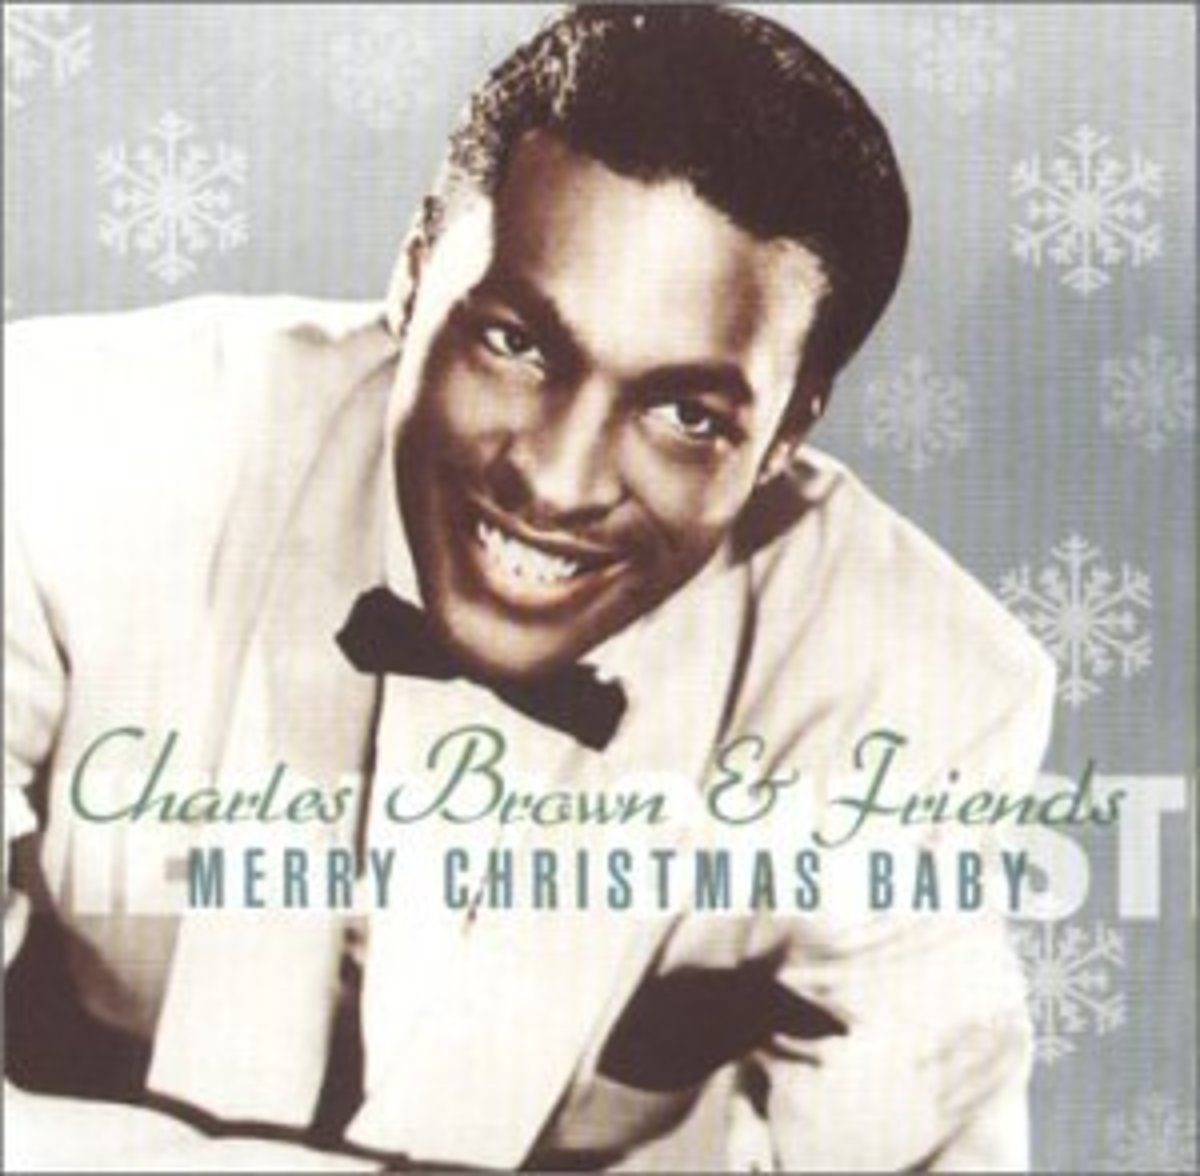 Merry Christmas Baby Charles Brown & Friends